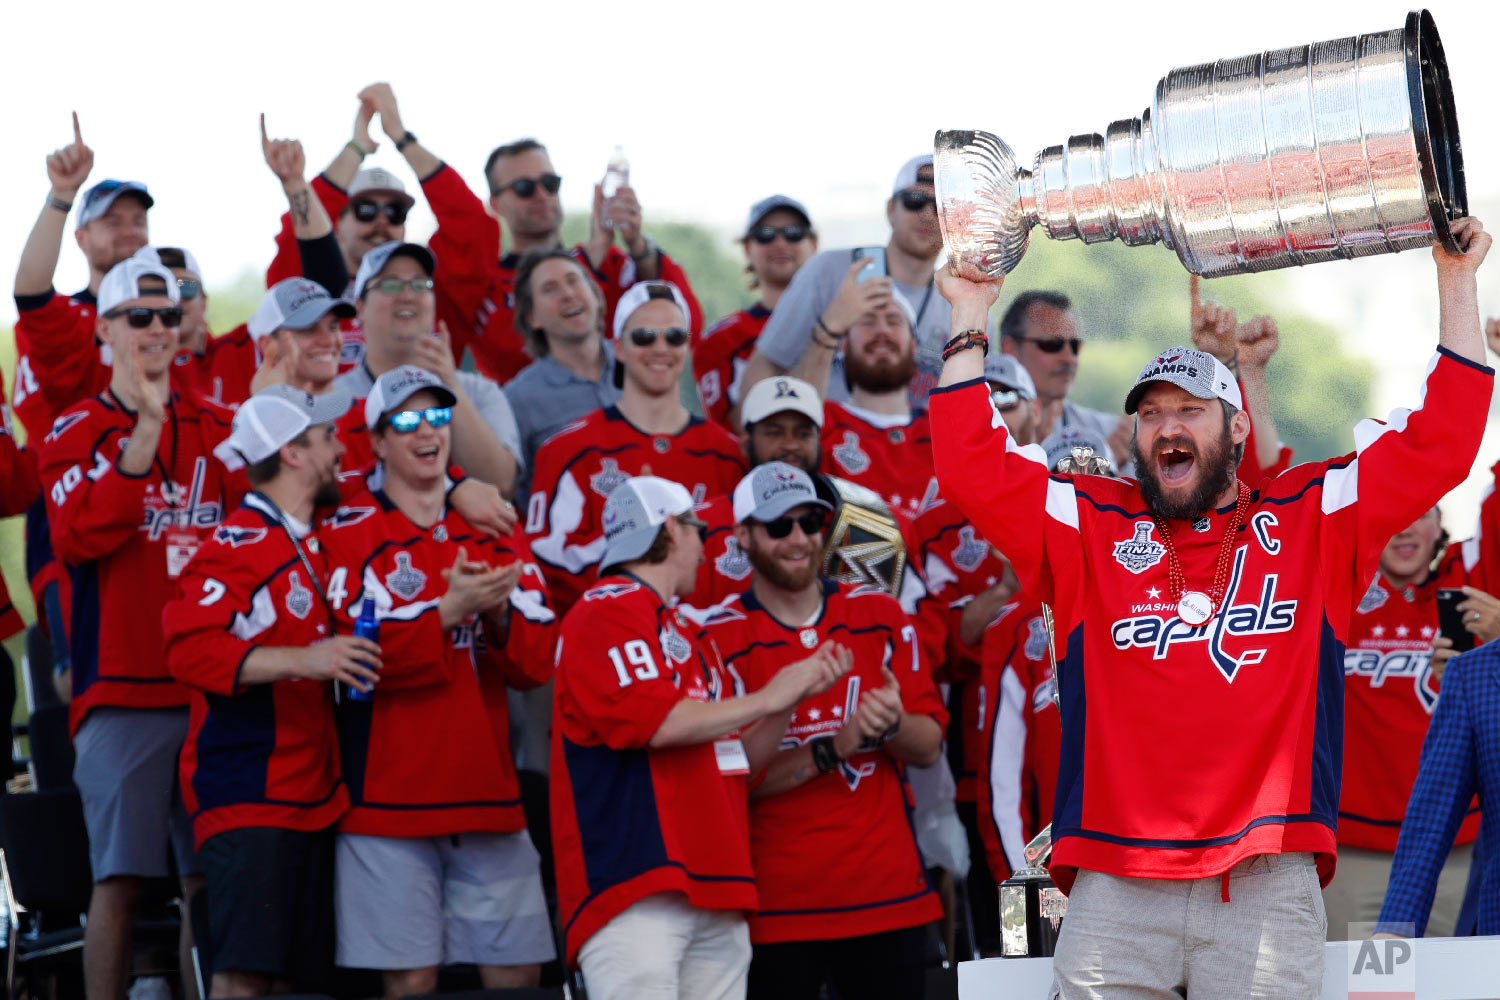  Washington Capitals Alex Ovechkin, of Russia, holds the Stanley Cup aloft during a victory rally on the National Mall in Washington on June 12, 2018. This was the first championship title for the Washington Capitals. (AP Photo/Jacquelyn Martin) 